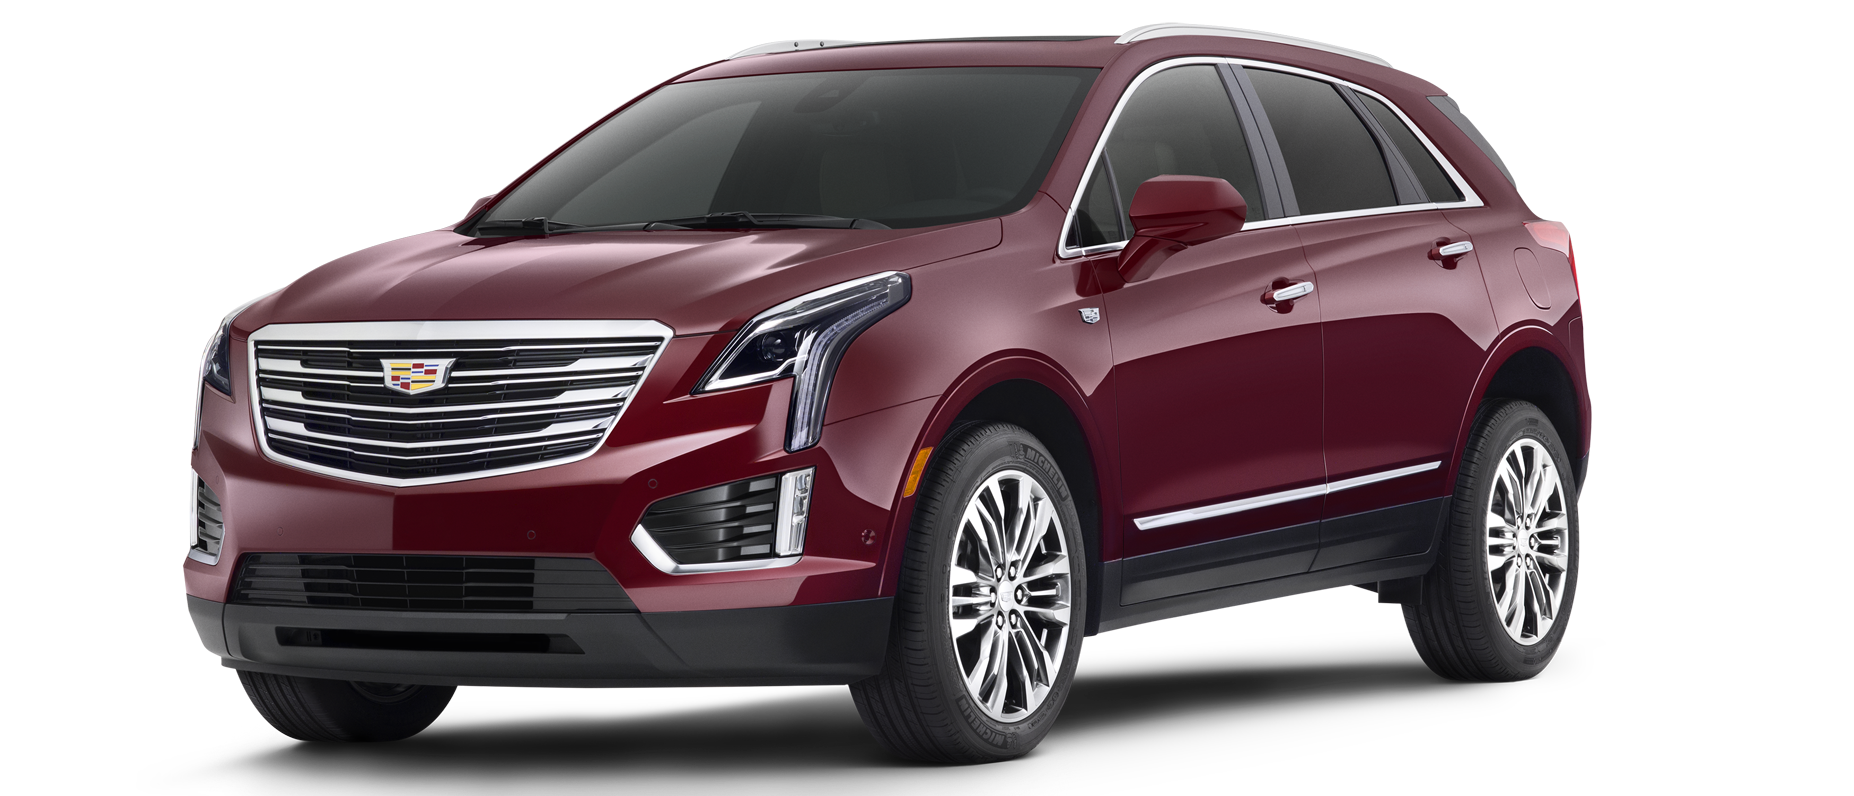 Cadillac PNG images 